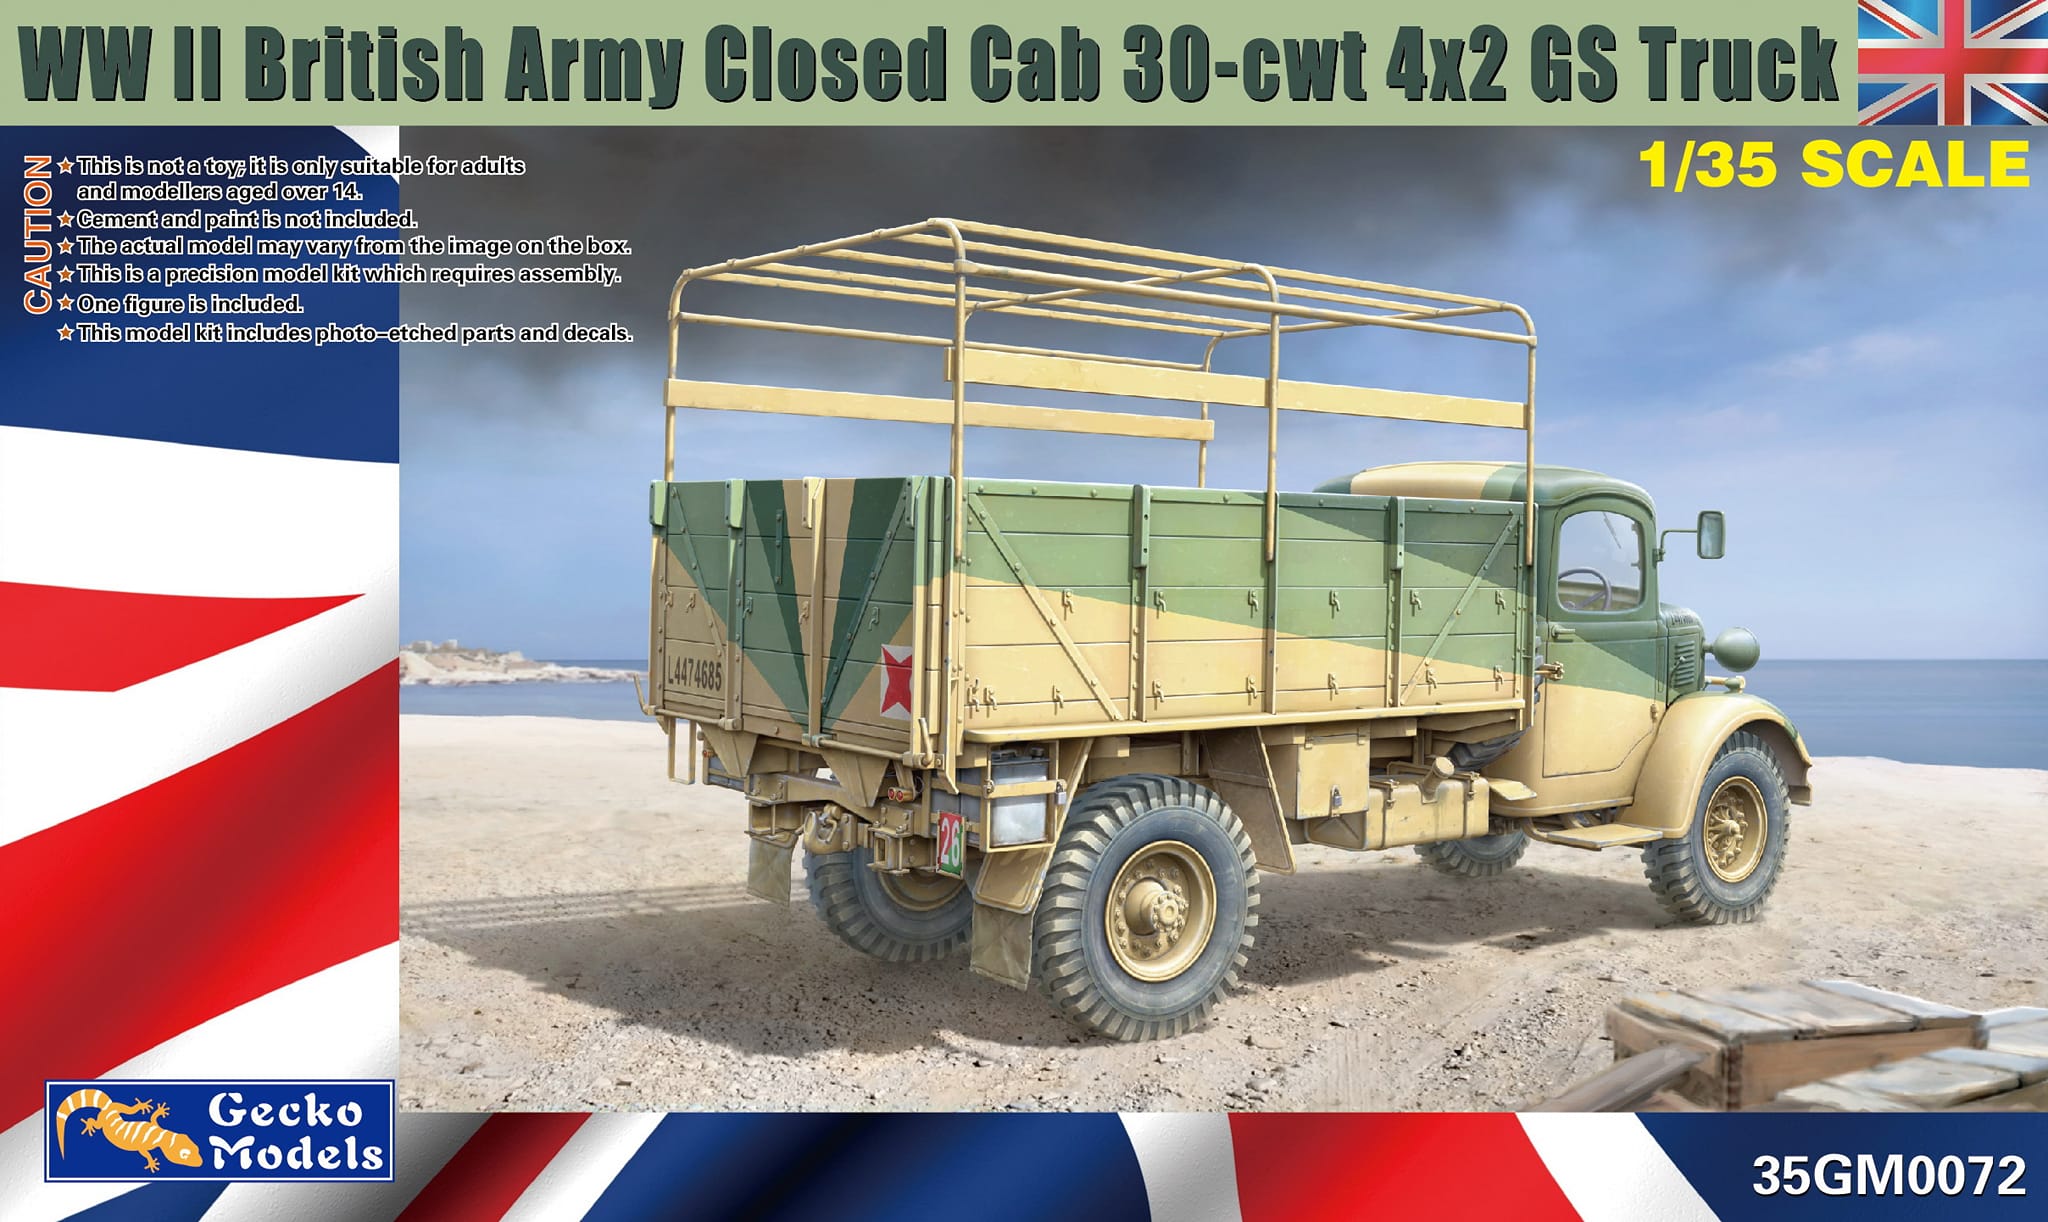 Preview: Gecko Models new WWII British Army Closed Cab 30-cwt 4x2 GS Truck 1/35th scale